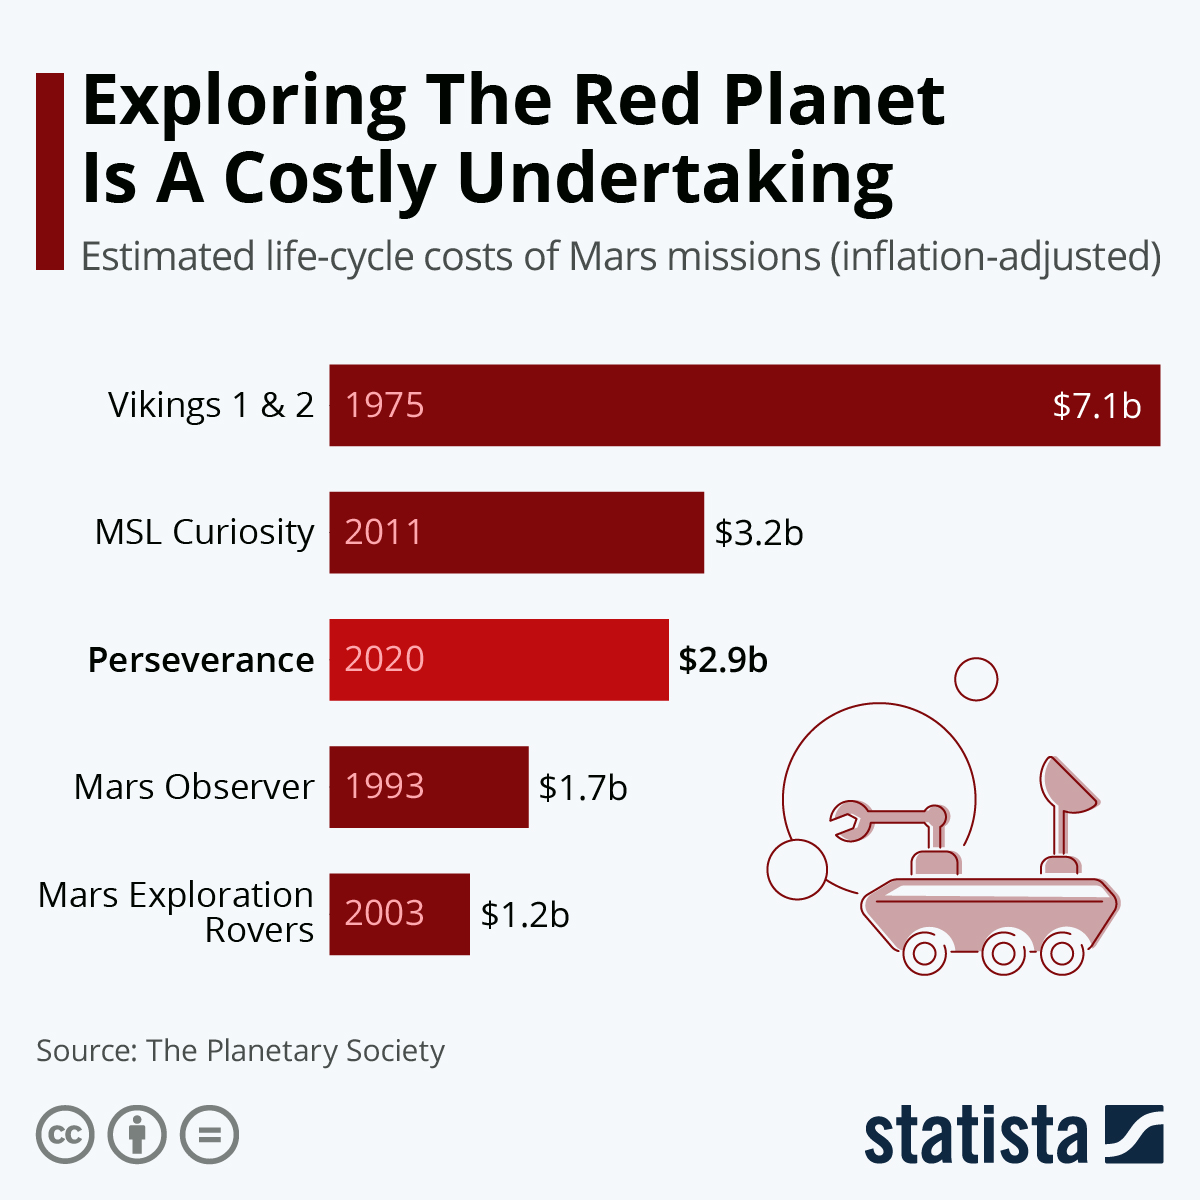 Exploring Mars is an expensive adventure